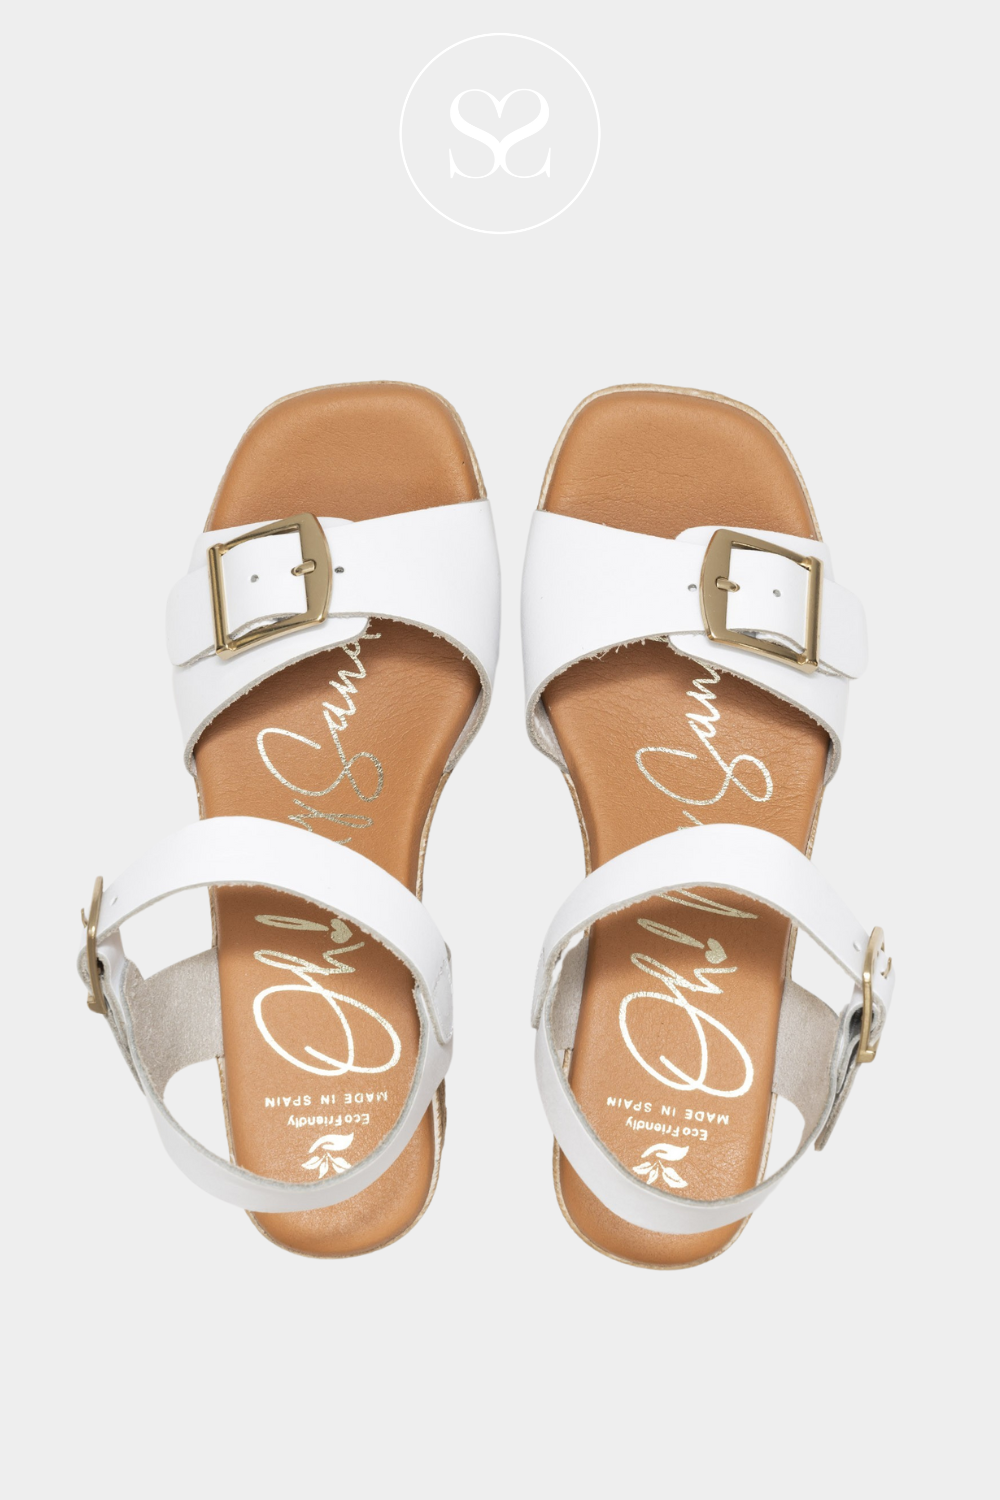 OH MY SANDALS 5459 WHITE WEDGE PLATFORM WITH ADJUSTABLE ANKLE STRAP AND STRAP ACROSS THE FOOT. ESPADRILLE SOLE